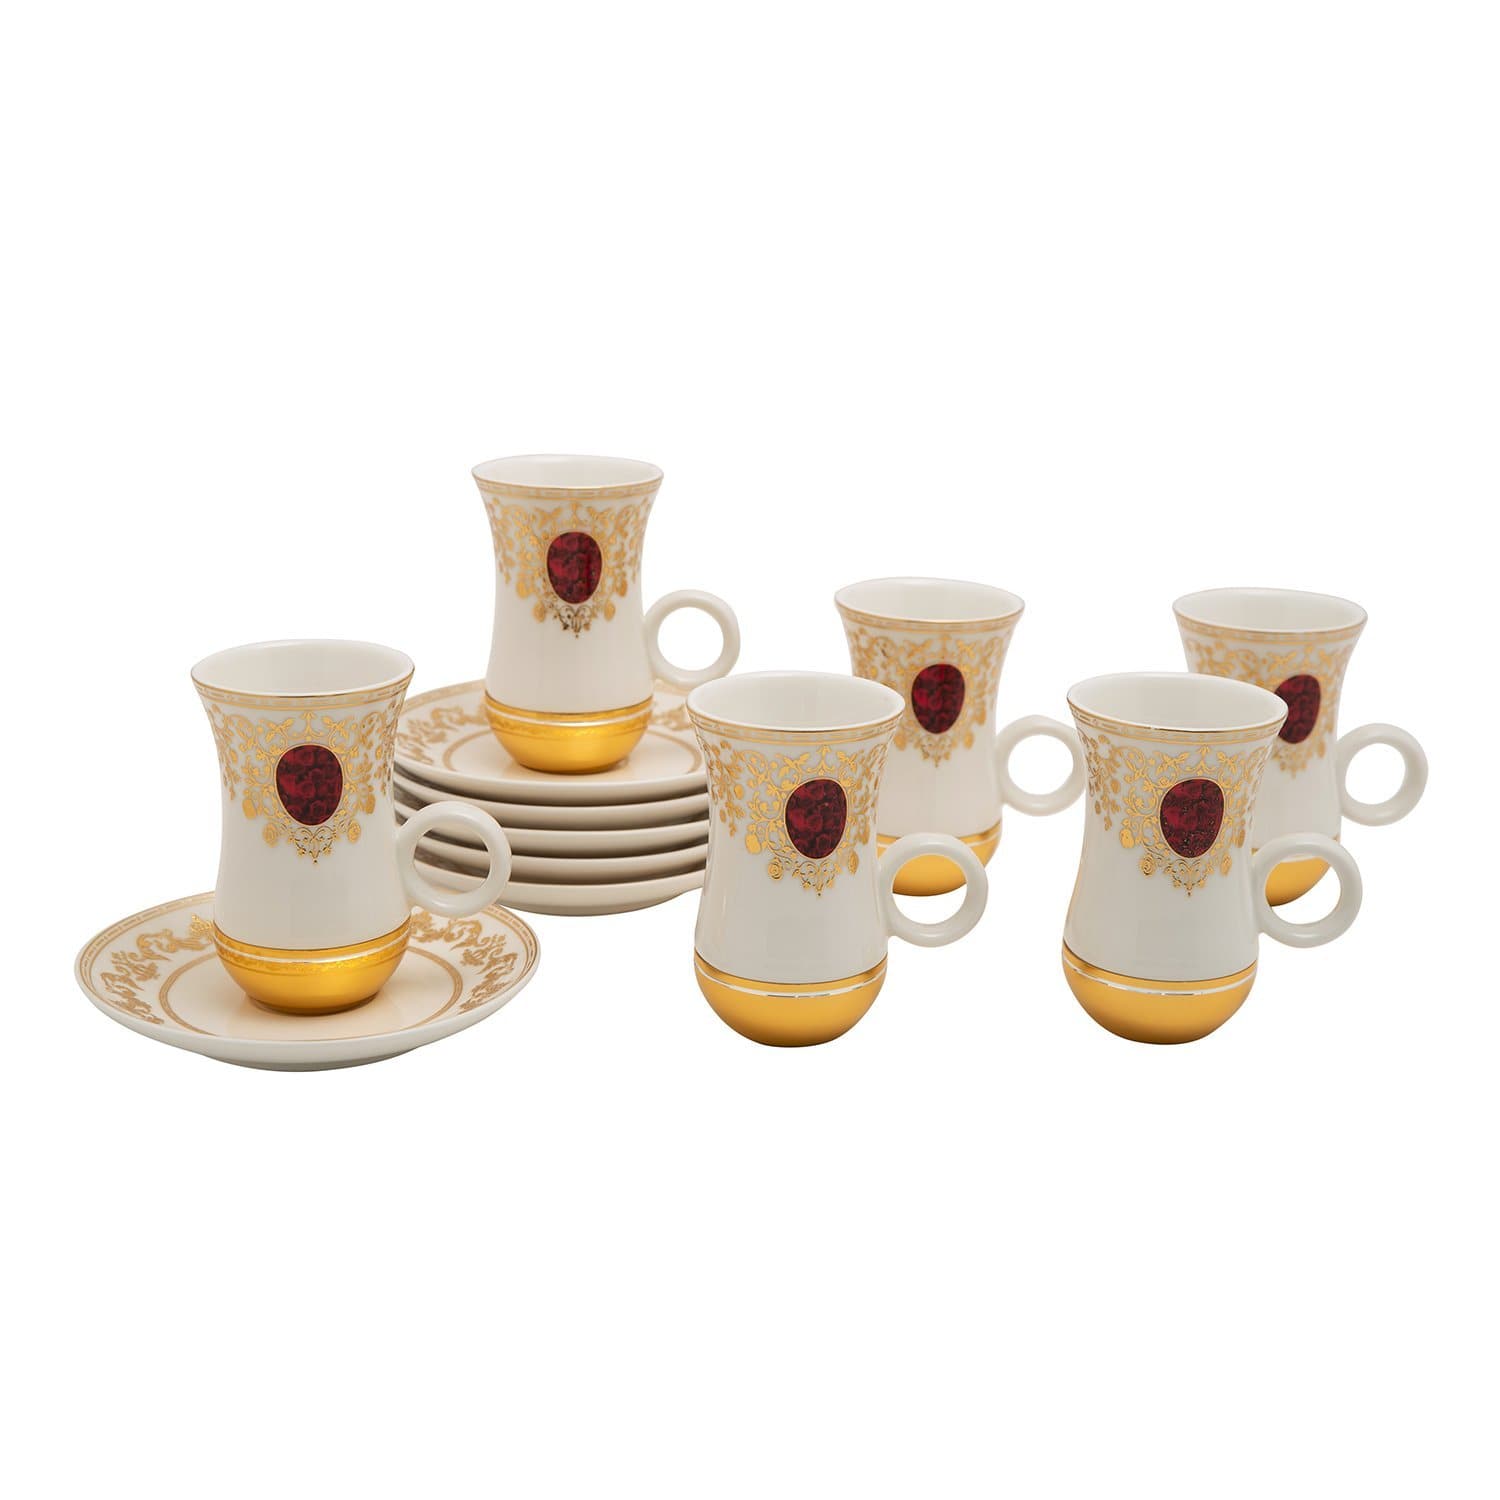 MARJANI RED GOLD 12PC SET ISTIKAN CUP AND SAUCER